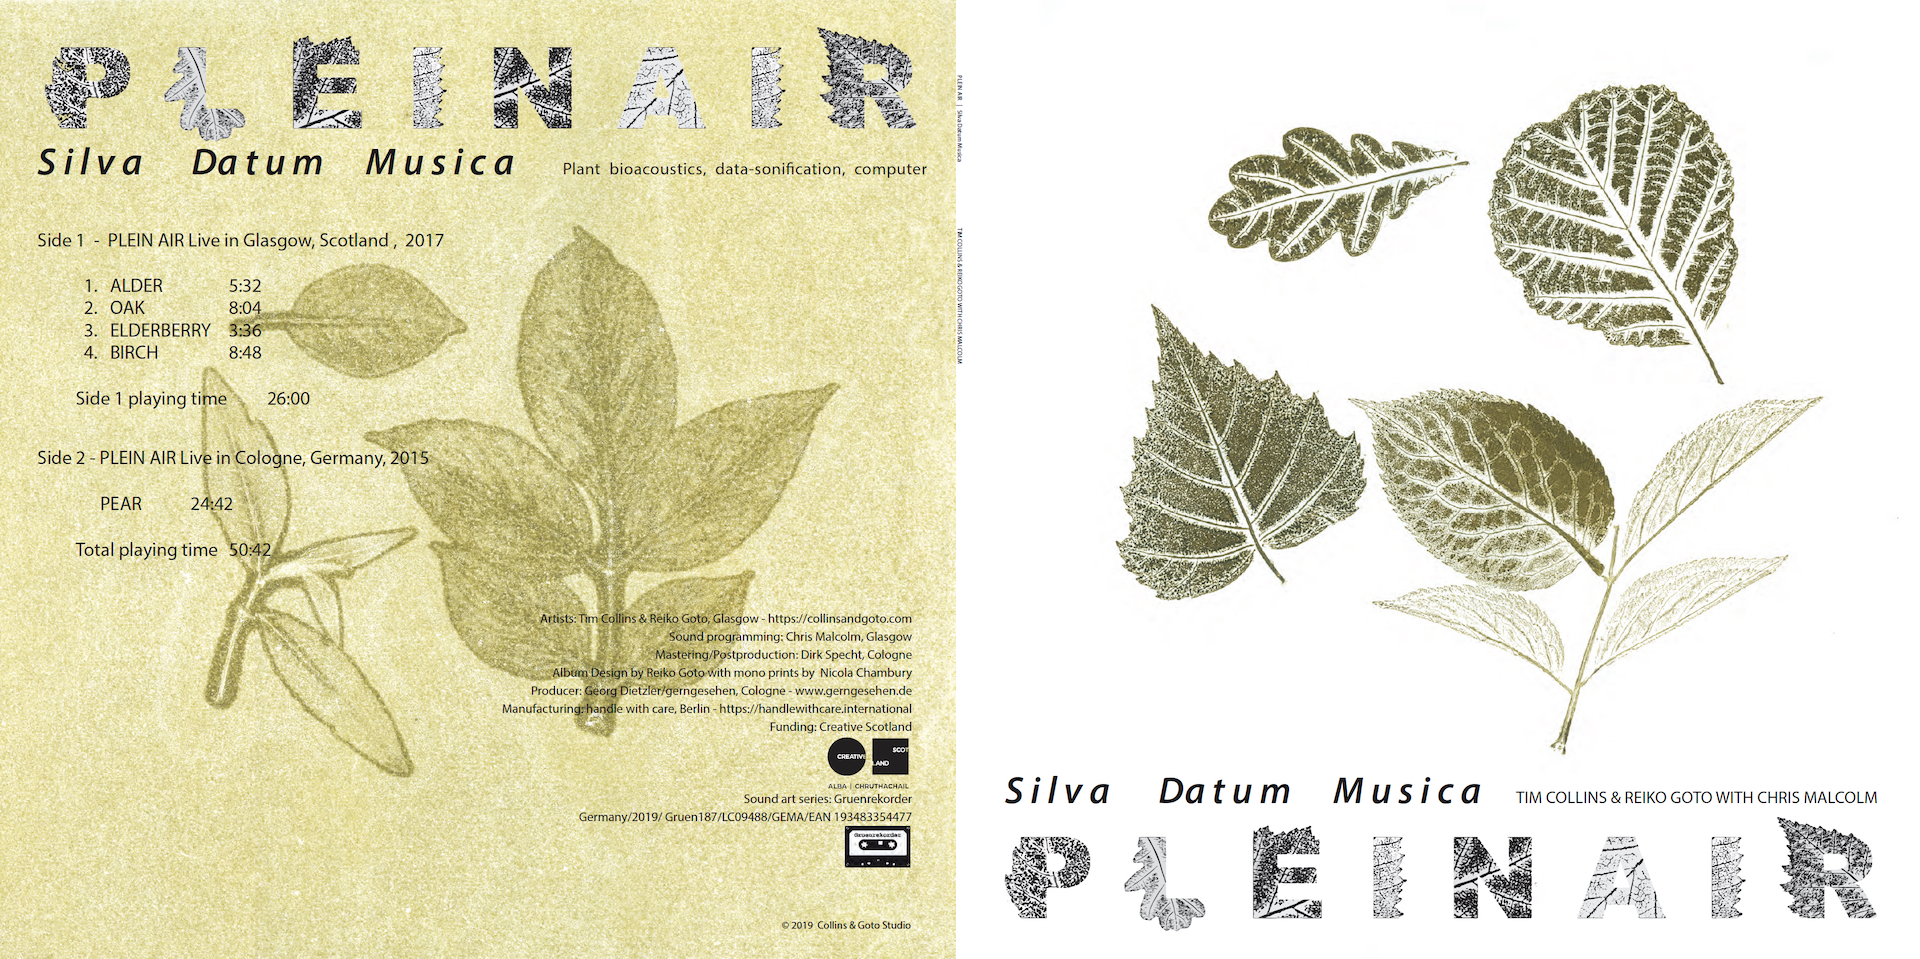 Plein Air: Silva Datum Musica reviewed by Robert Barry in The Wire Issue 429